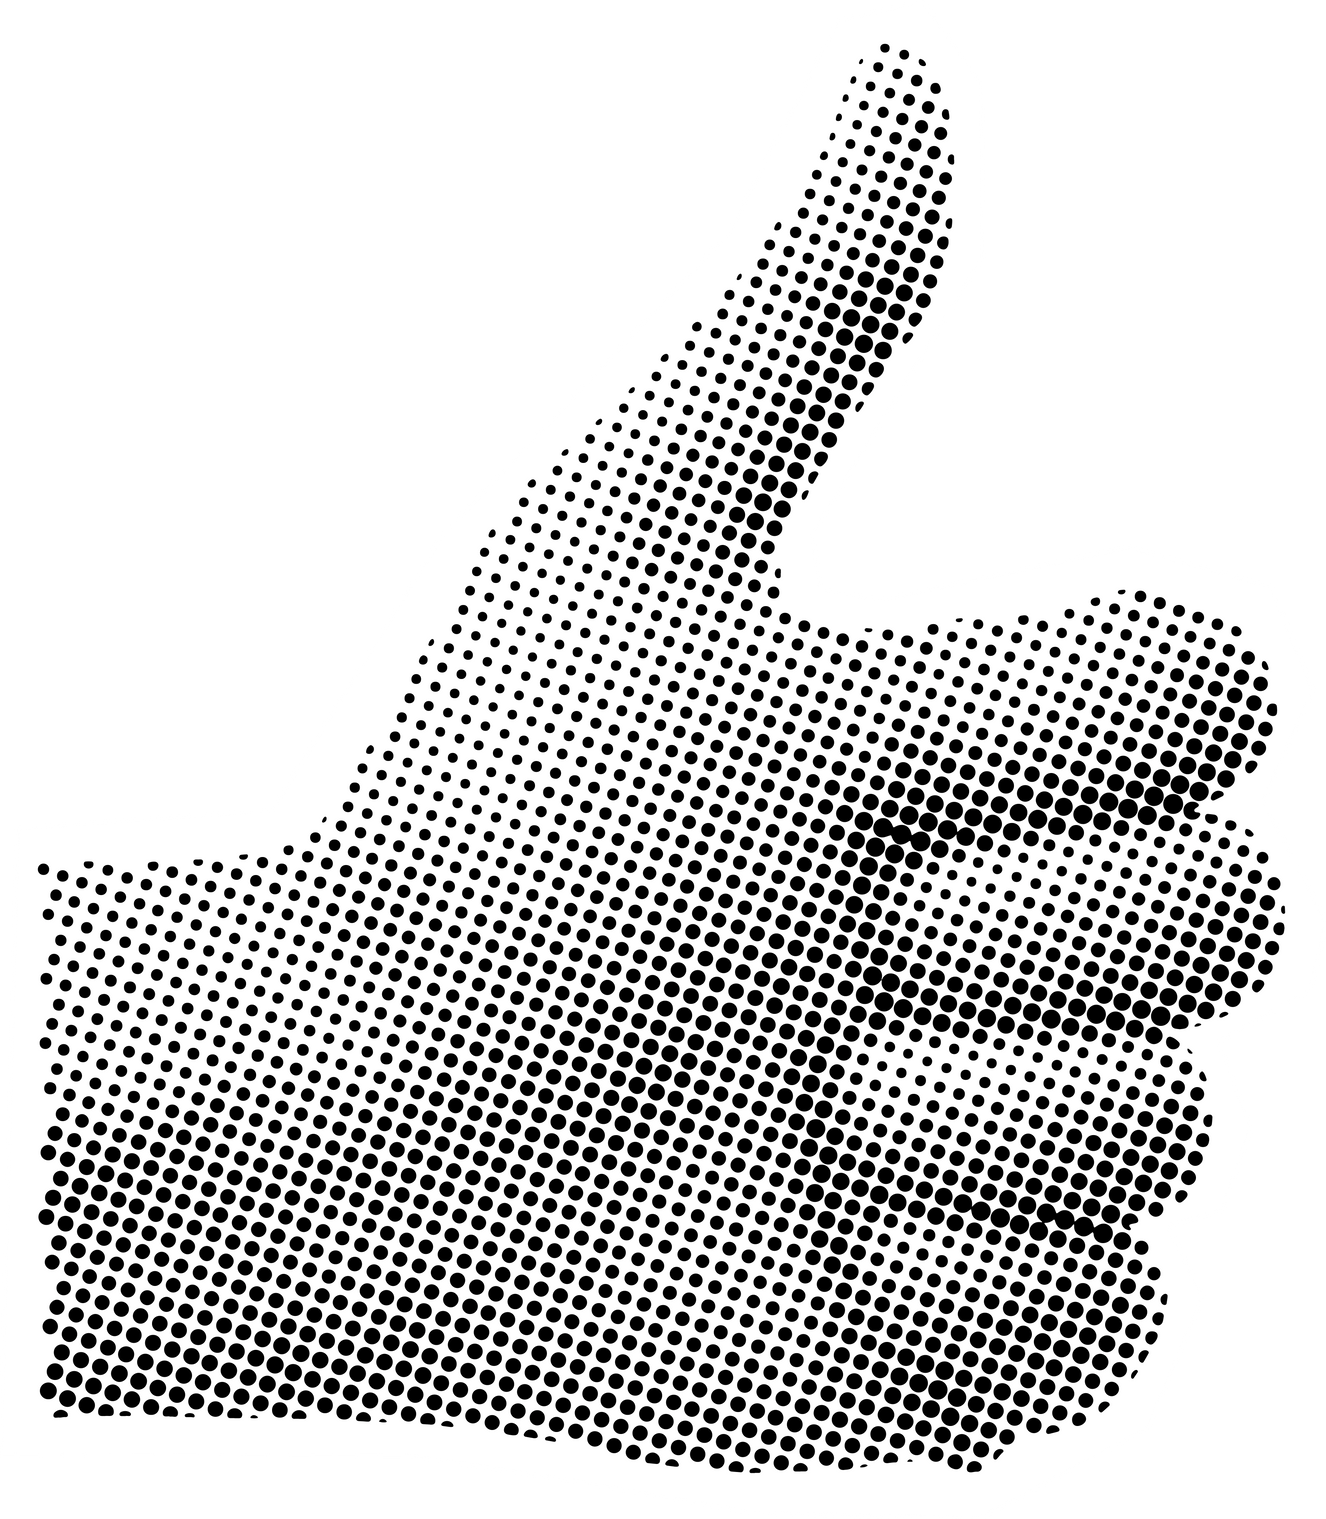 Halftone collage thumb up, halftone effect thumb up element